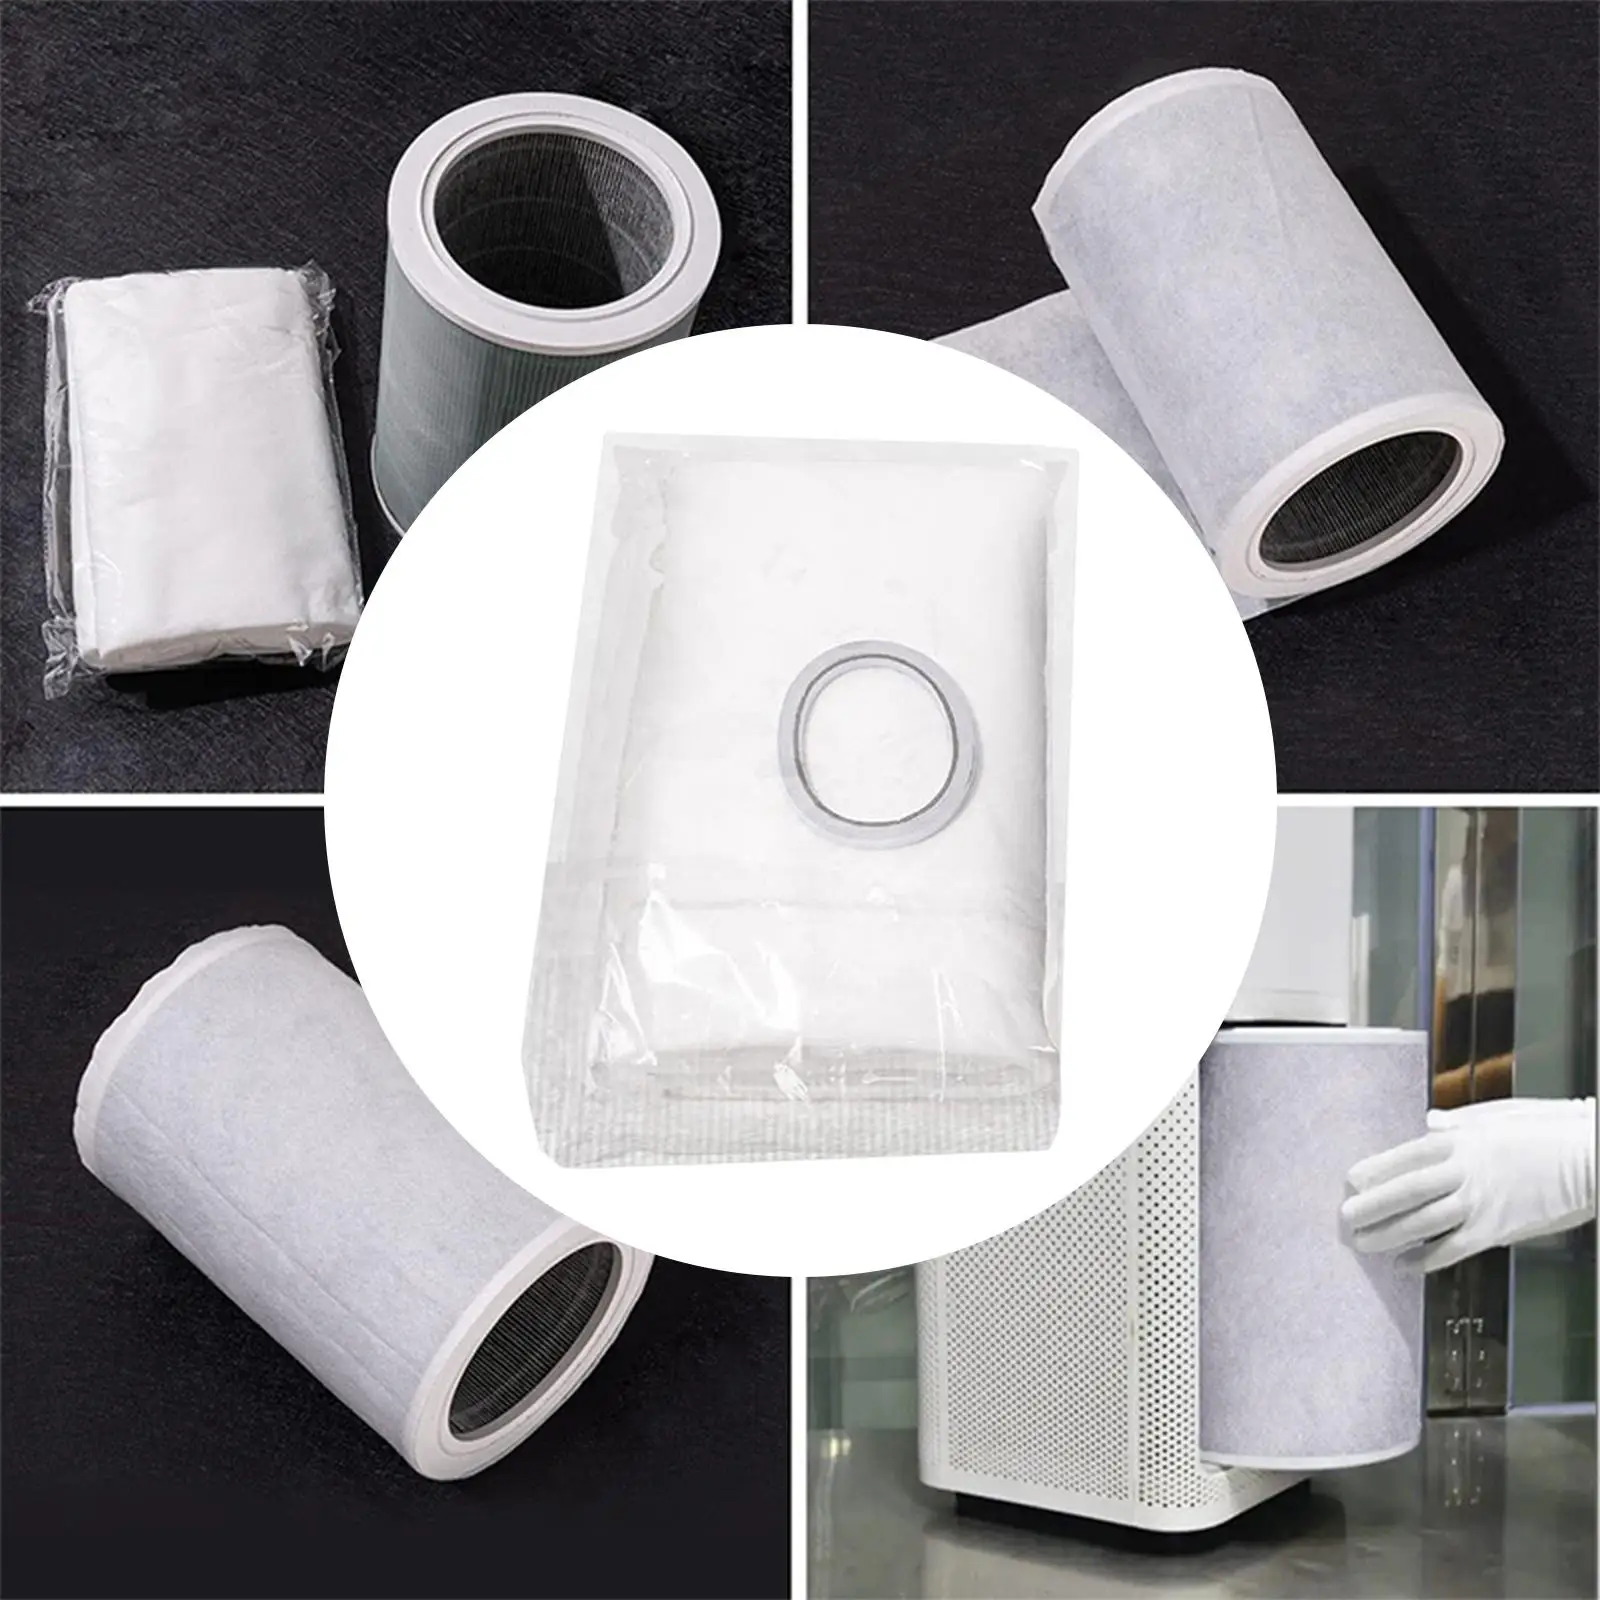 Air Duct Filters Low Air Resistance Replacement Electrostatic Polyester Register Filters Window Air Conditioner Filter